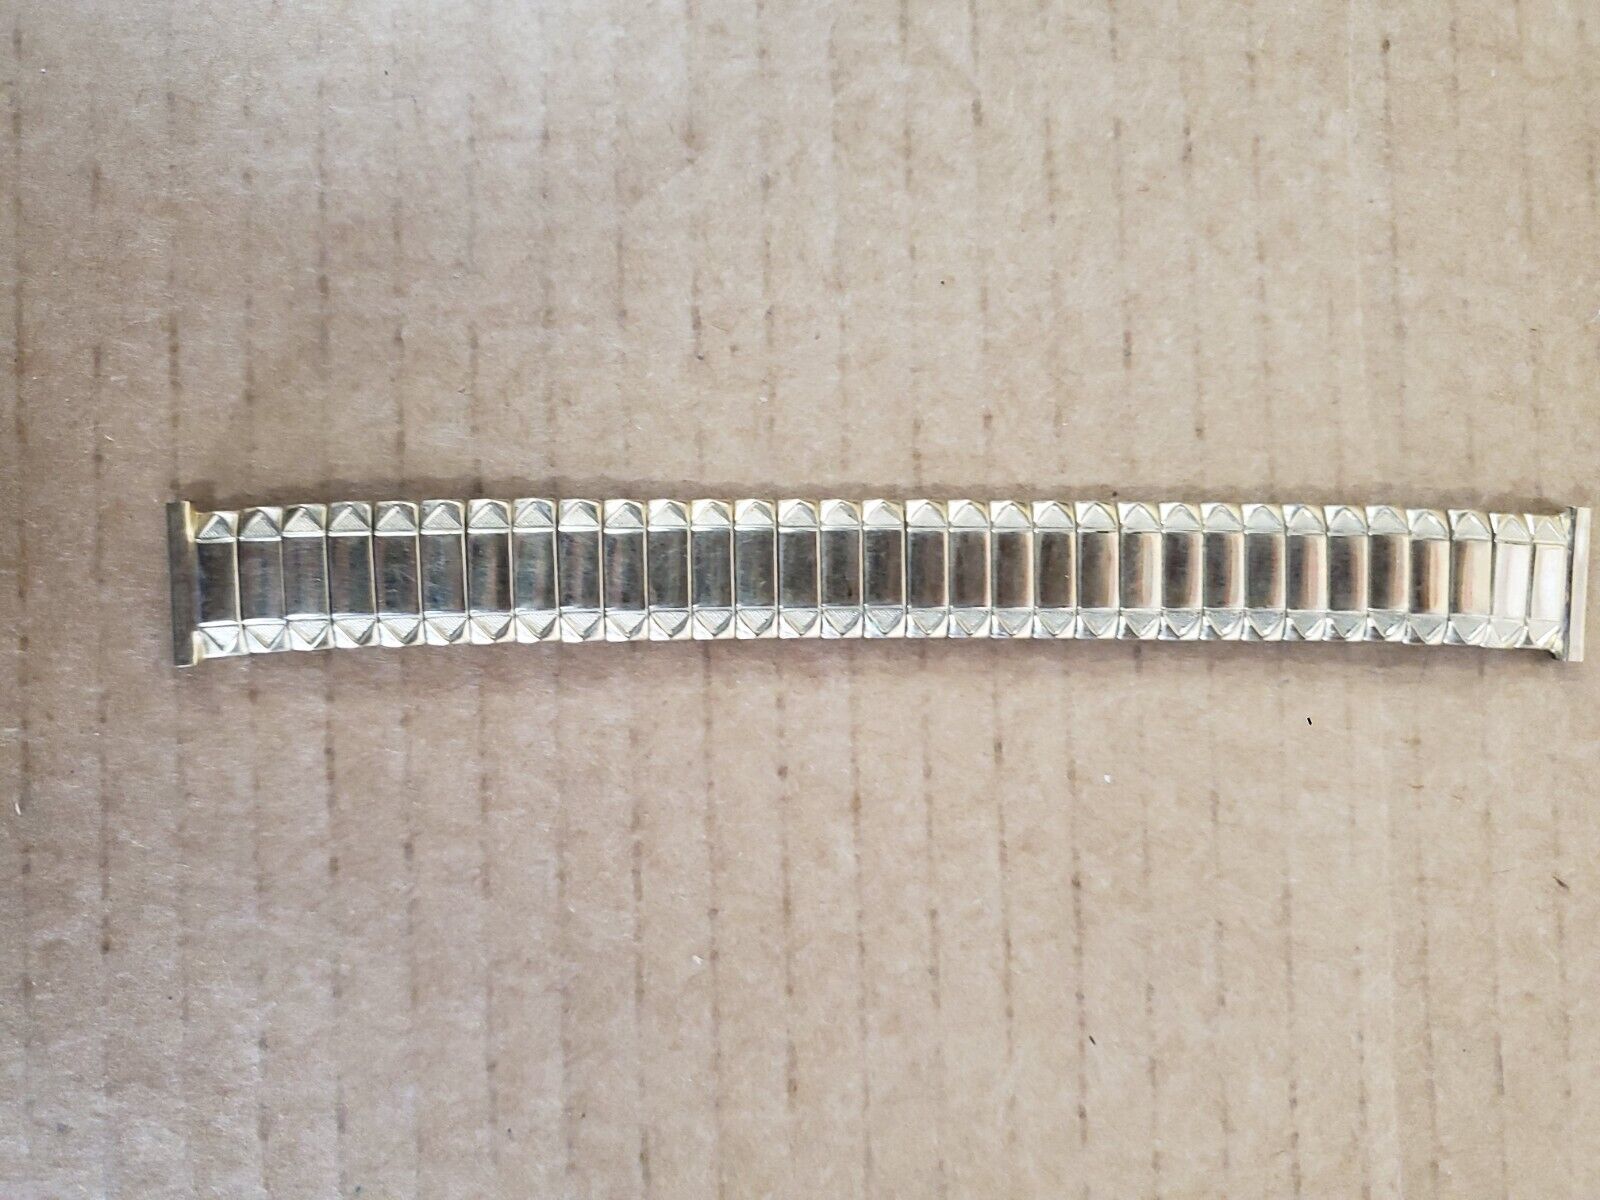 FOSTER GOLD  Stainless stretch Band 1970s Vintage Watch Band W120 - $54.89